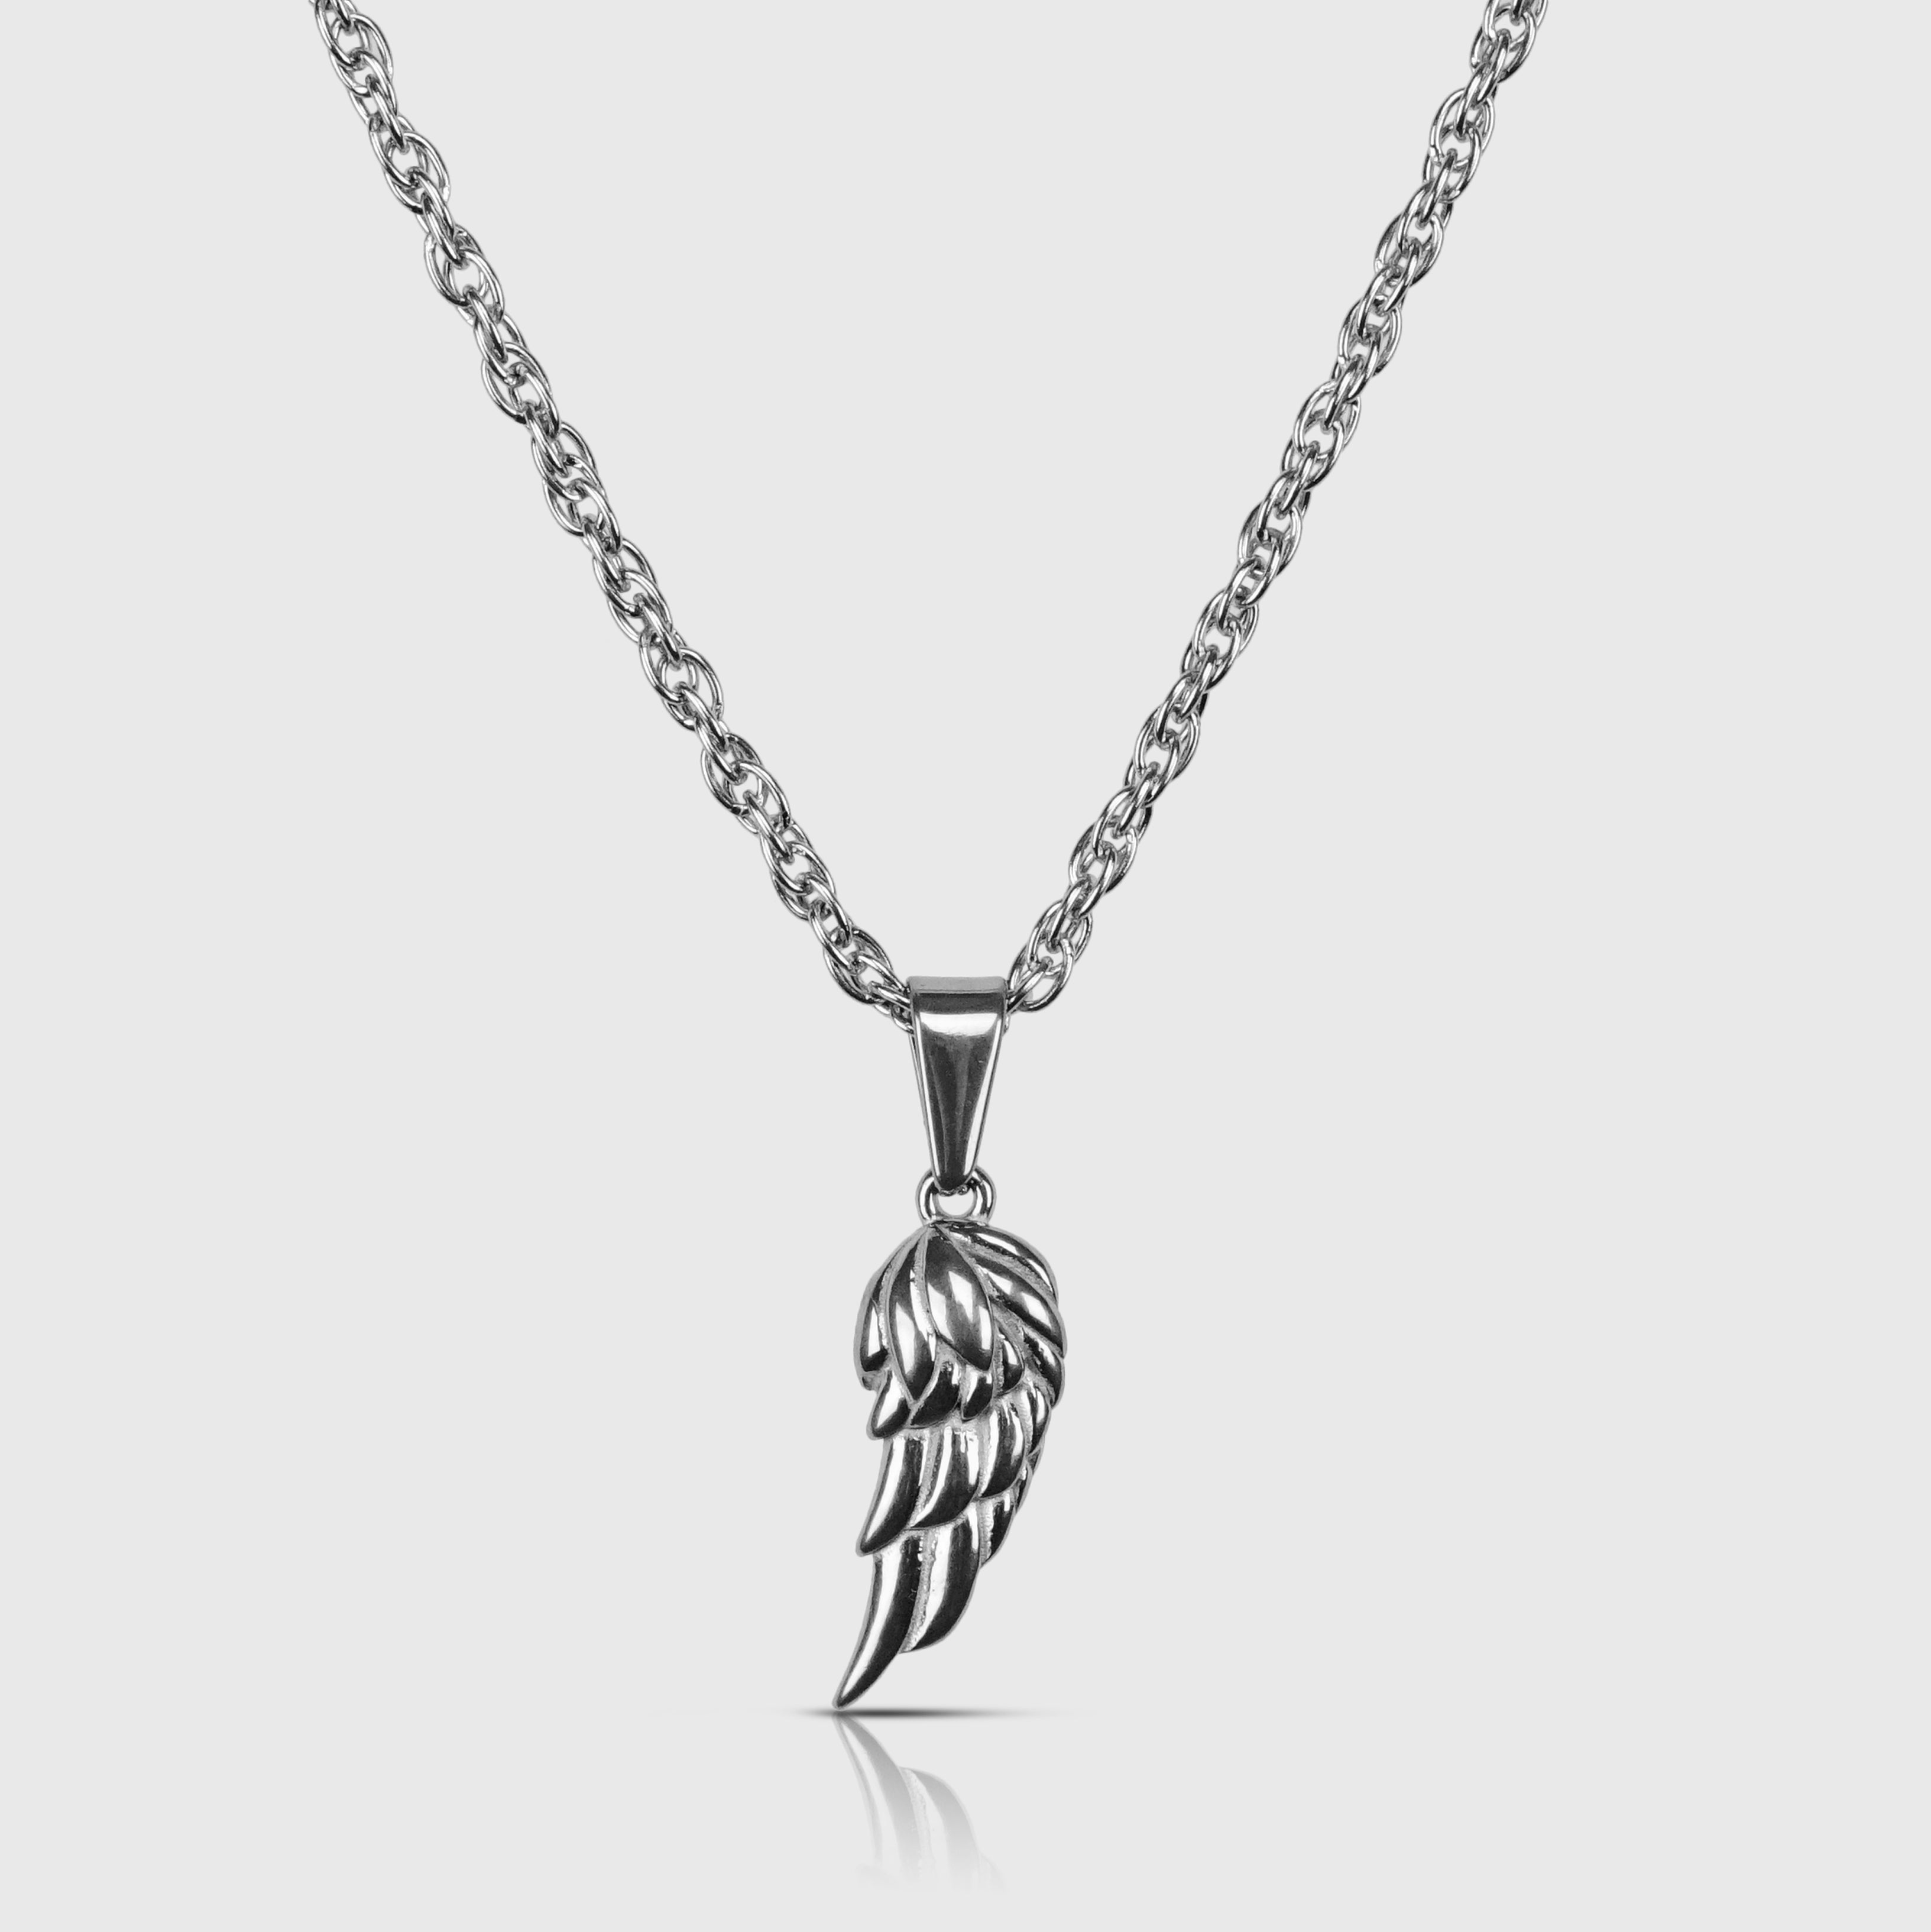 WING NECKLACE - SILVER TONE